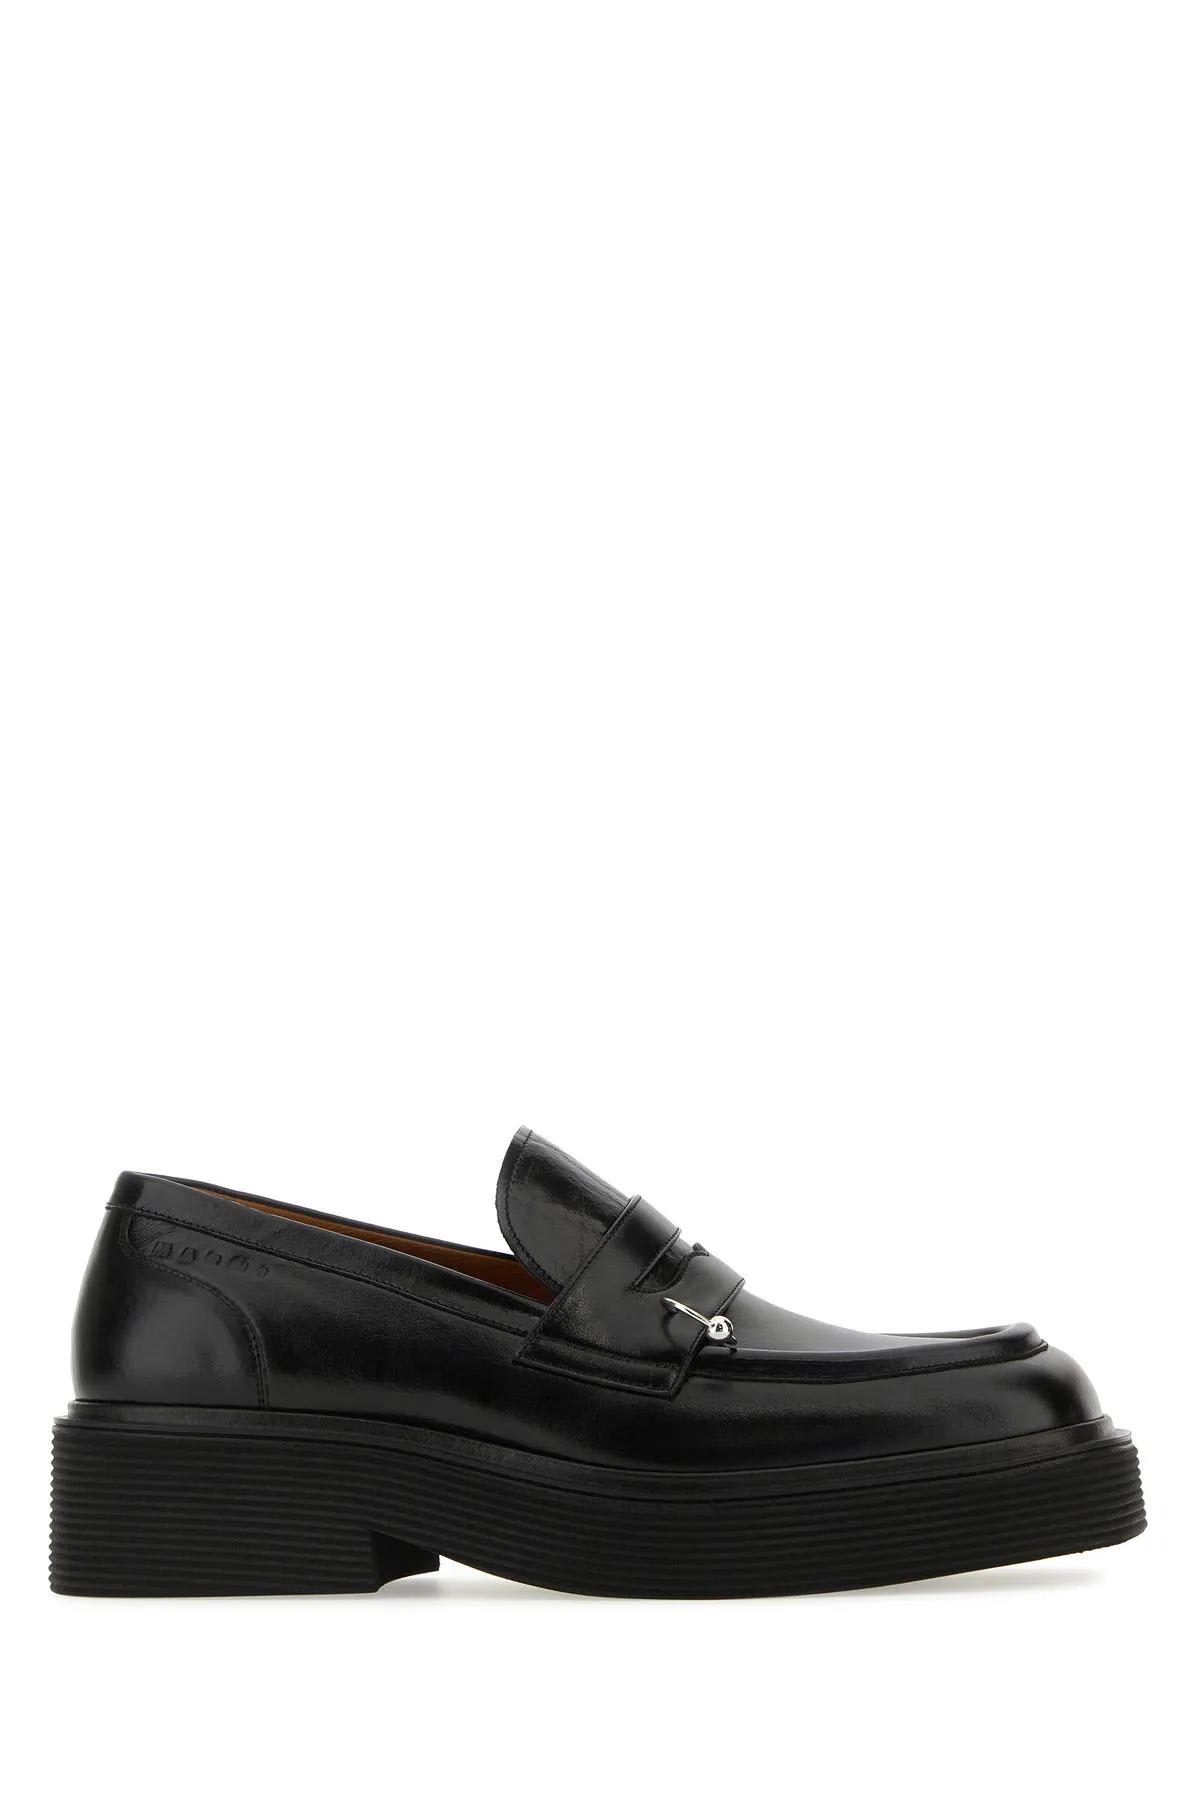 MARNI BLACK LEATHER LOAFERS